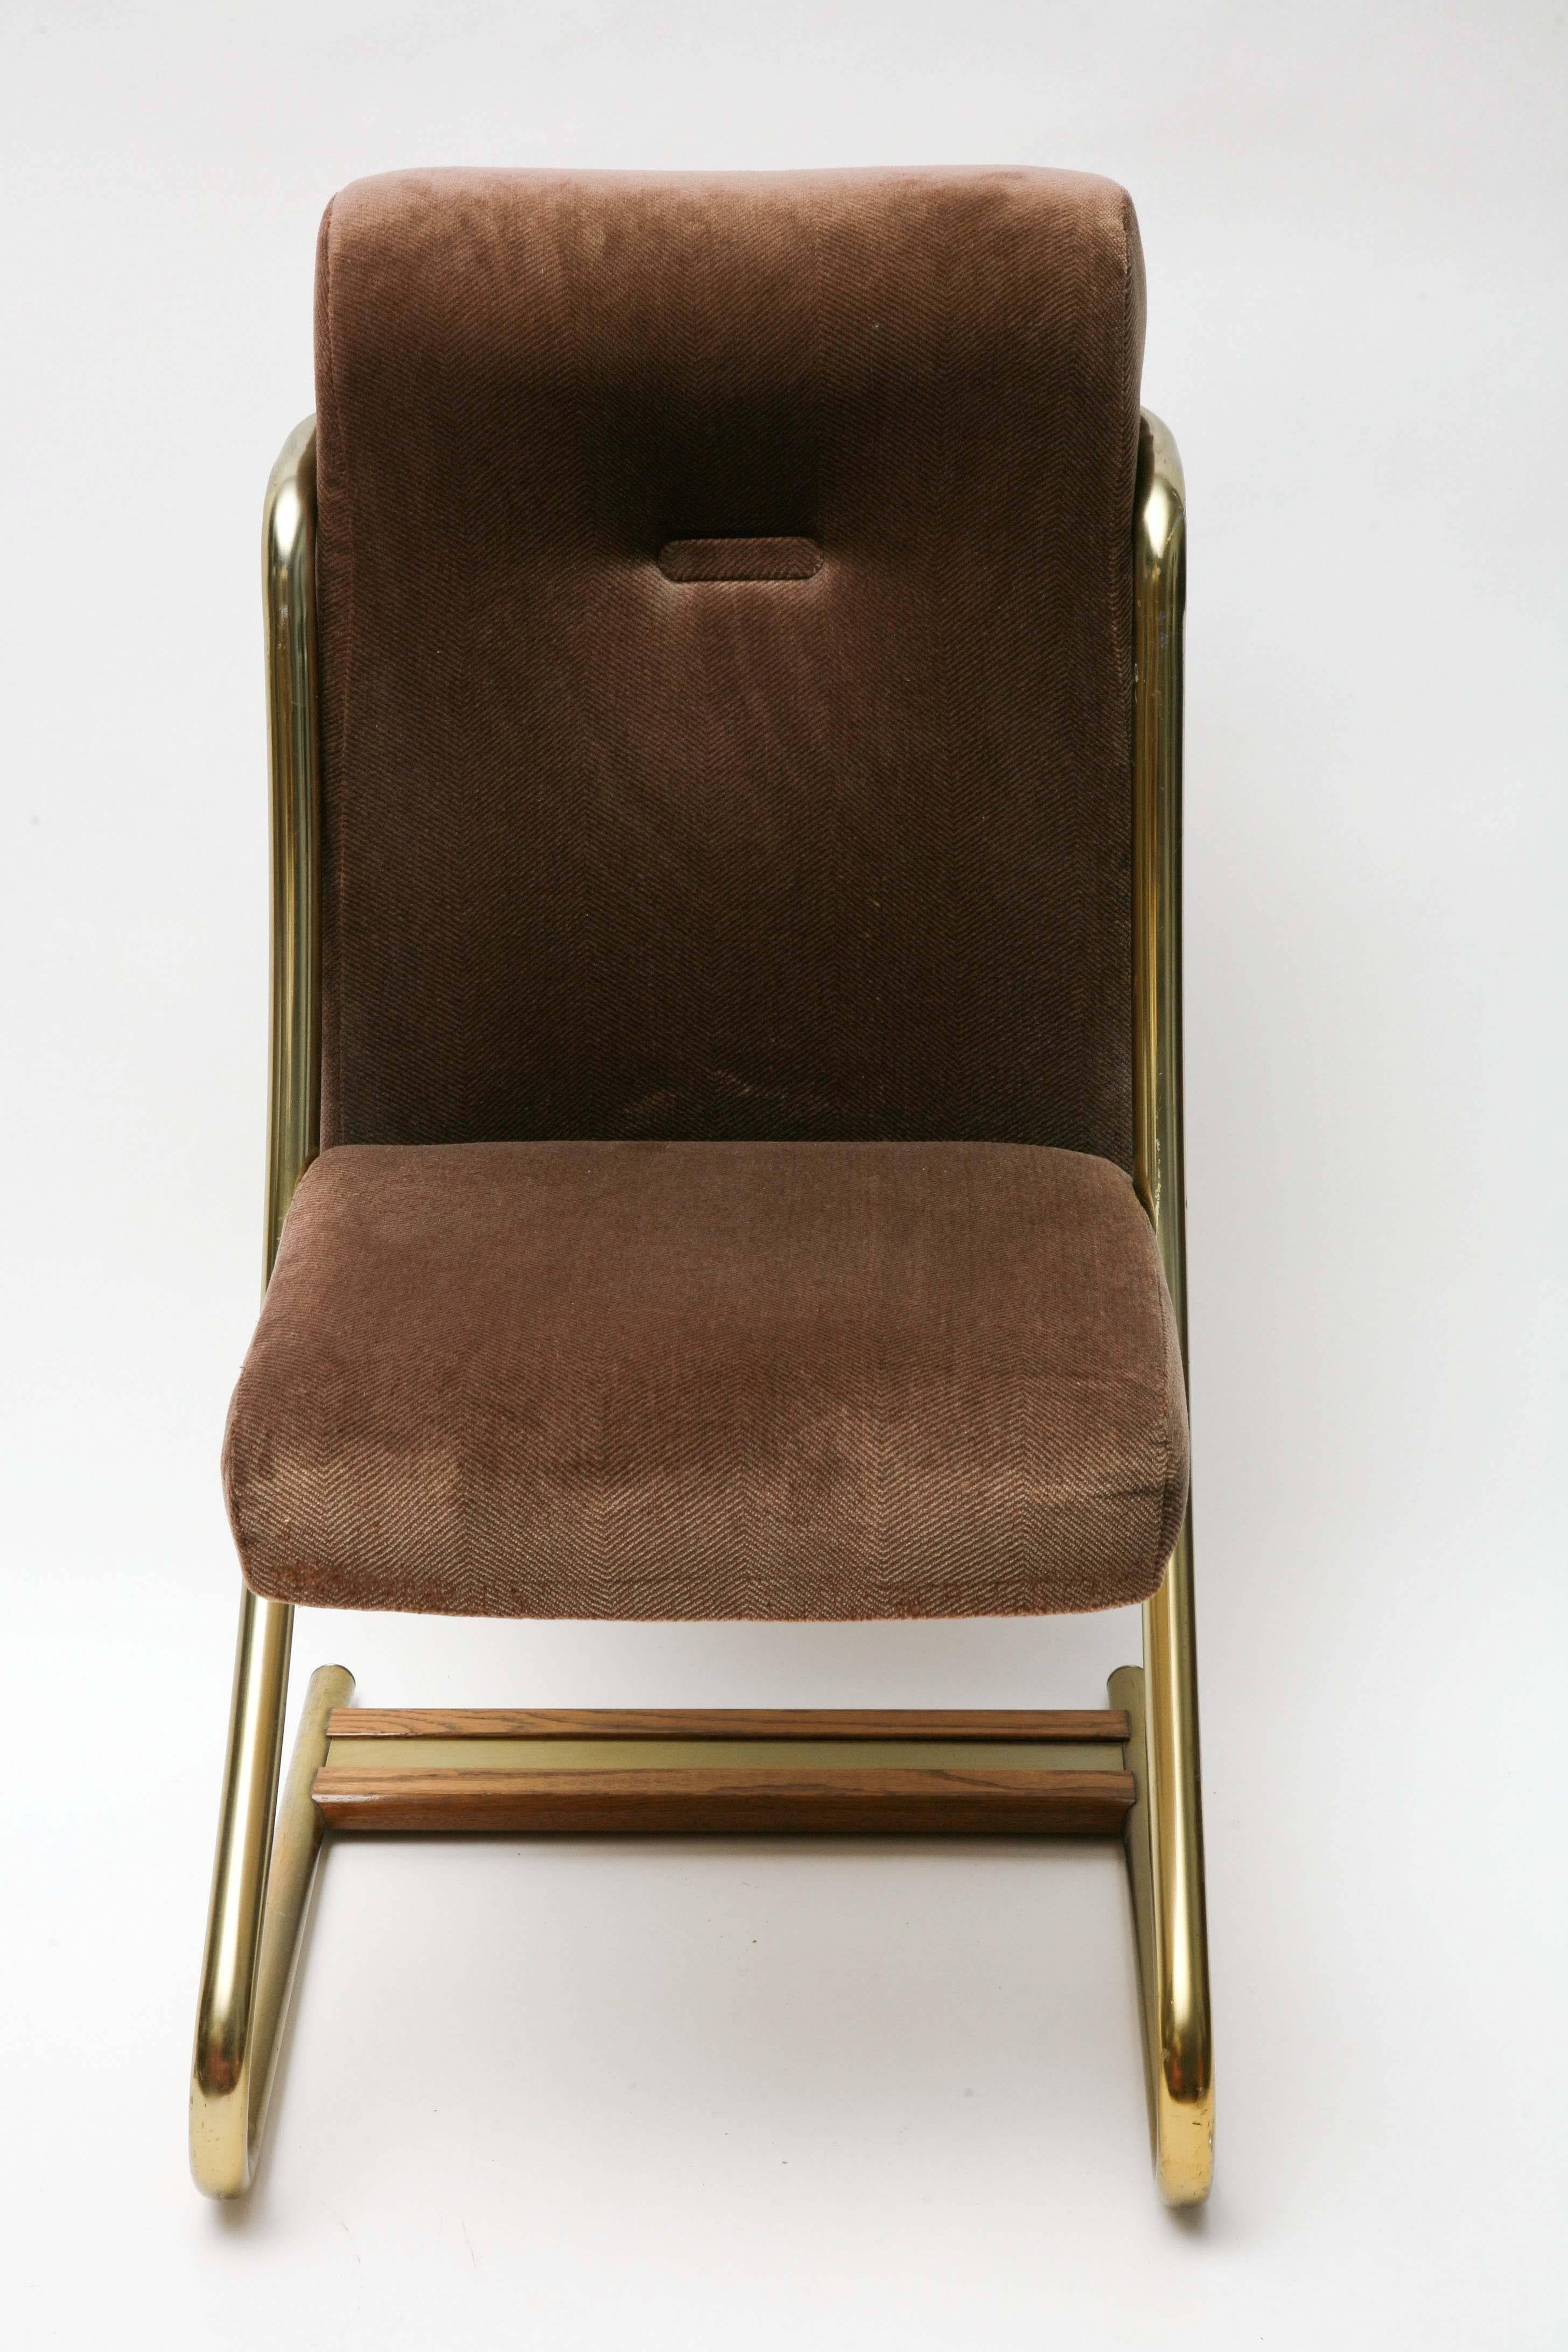 Upholstered chairs with brass frames and wood and brass support accents across the bottom. Chairs made by Daystrom furniture company.